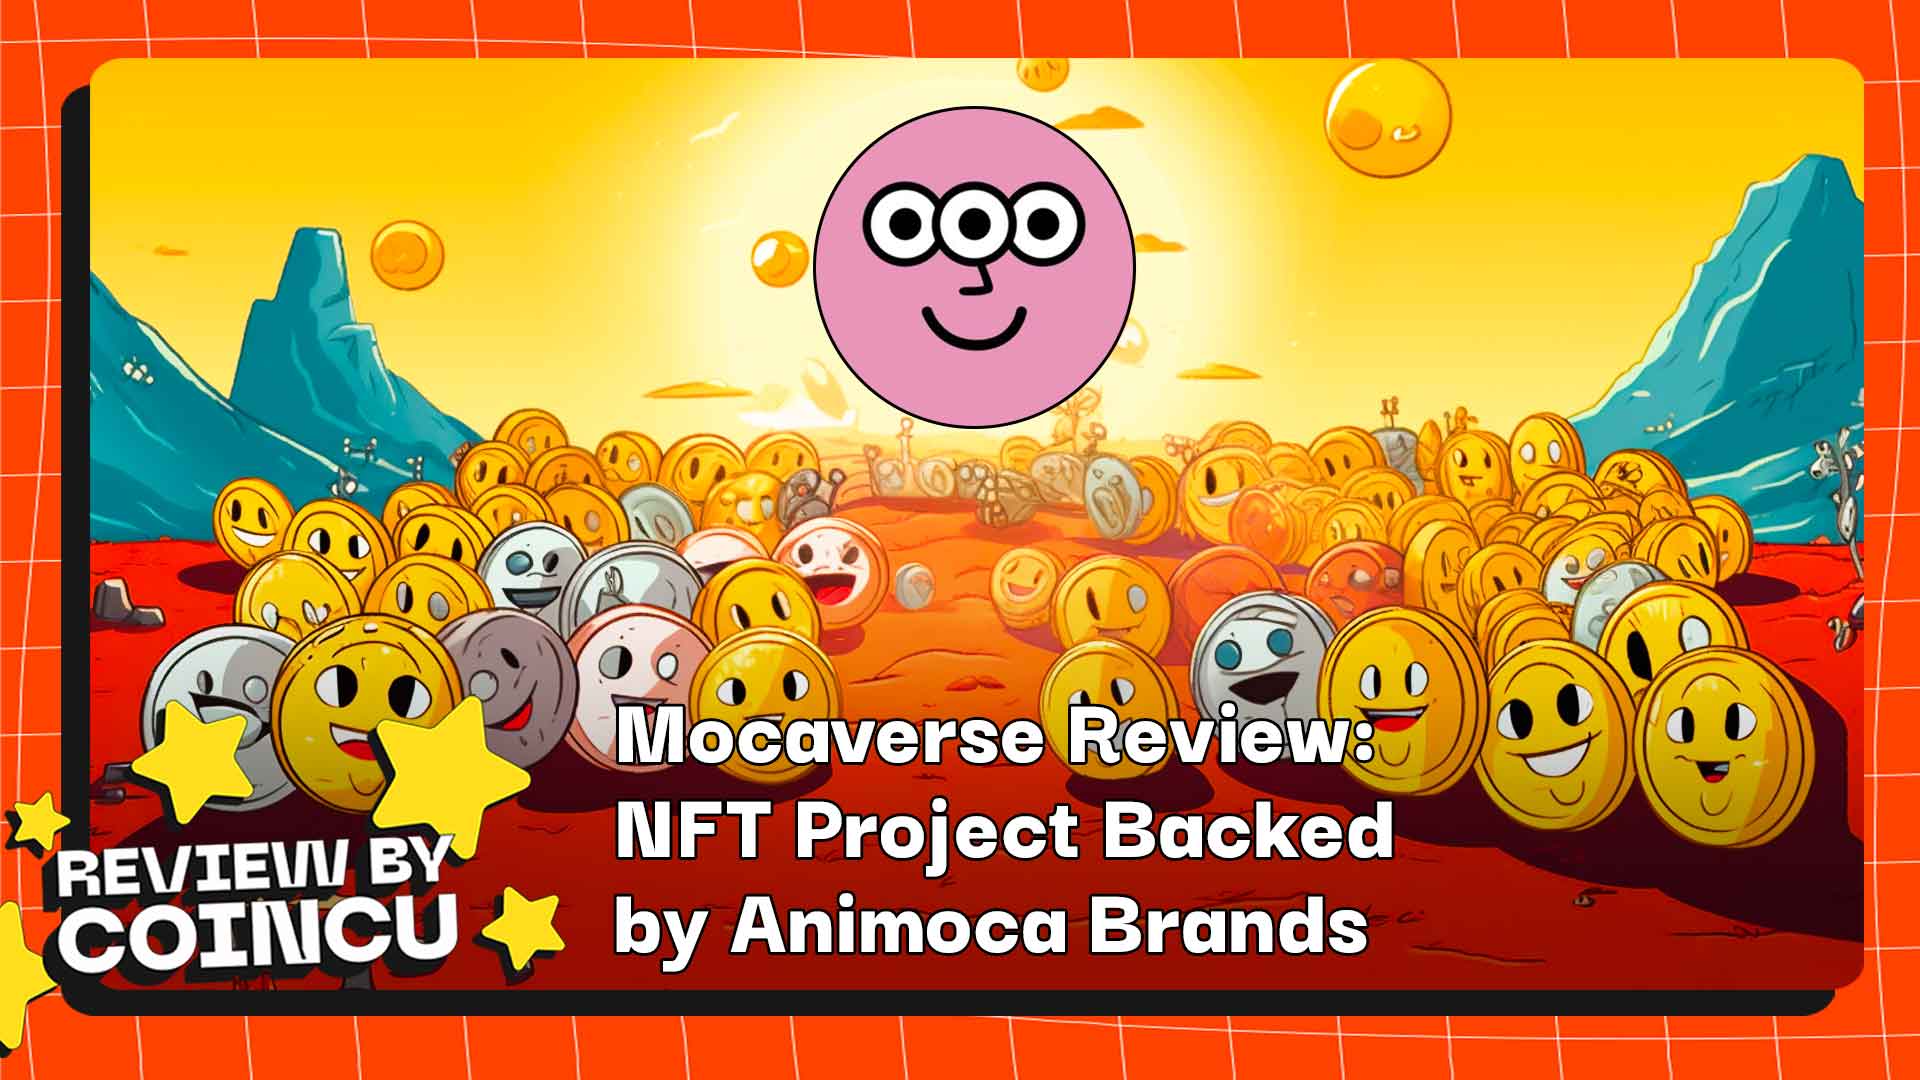 Mocaverse Review: NFT Project Backed by Animoca Brands